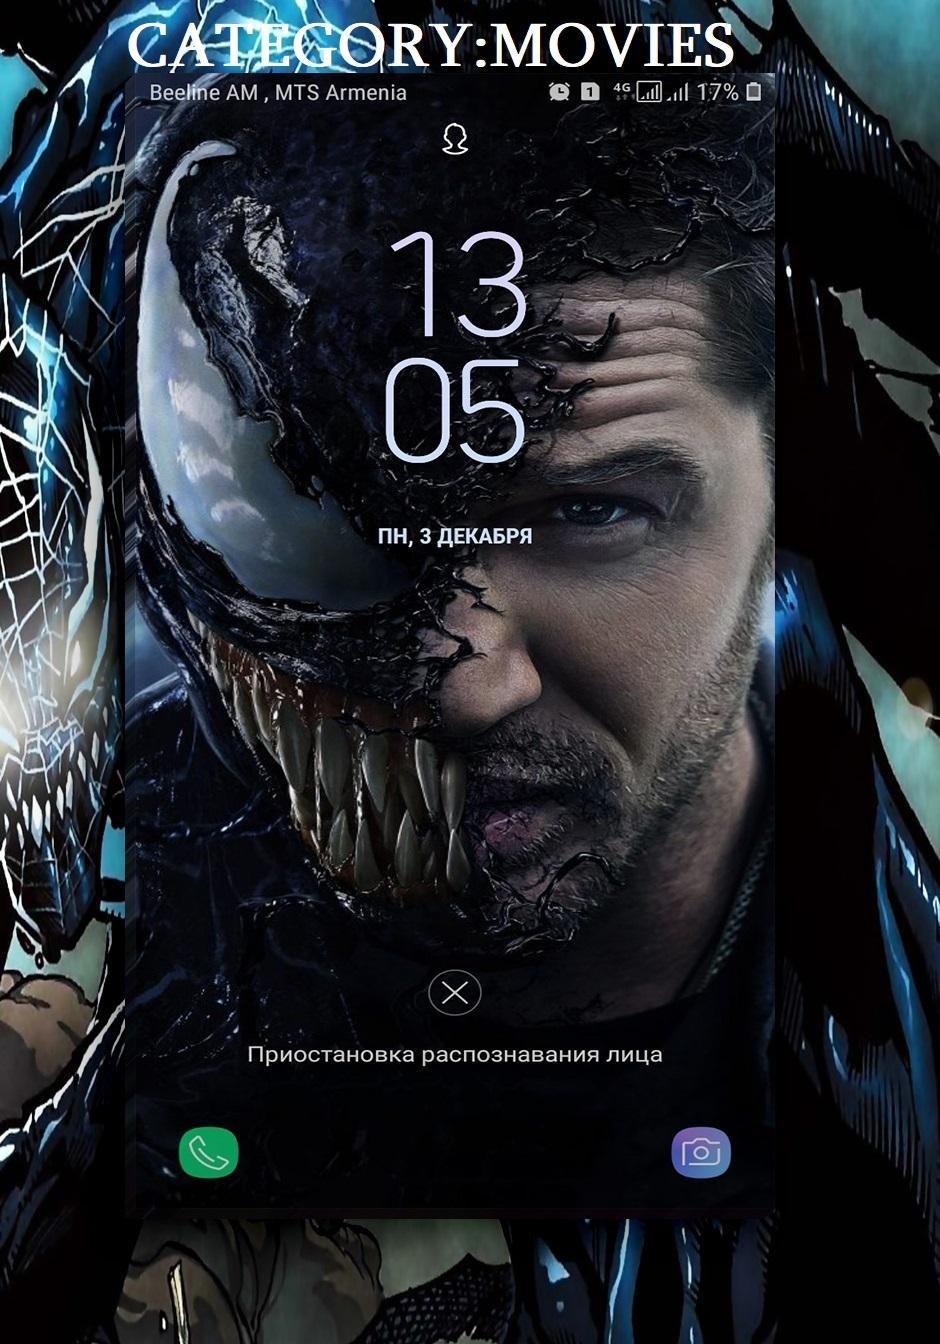 Wallpapers 4K: Photo mobile, Full HD, Full screen APK pour Android  Télécharger